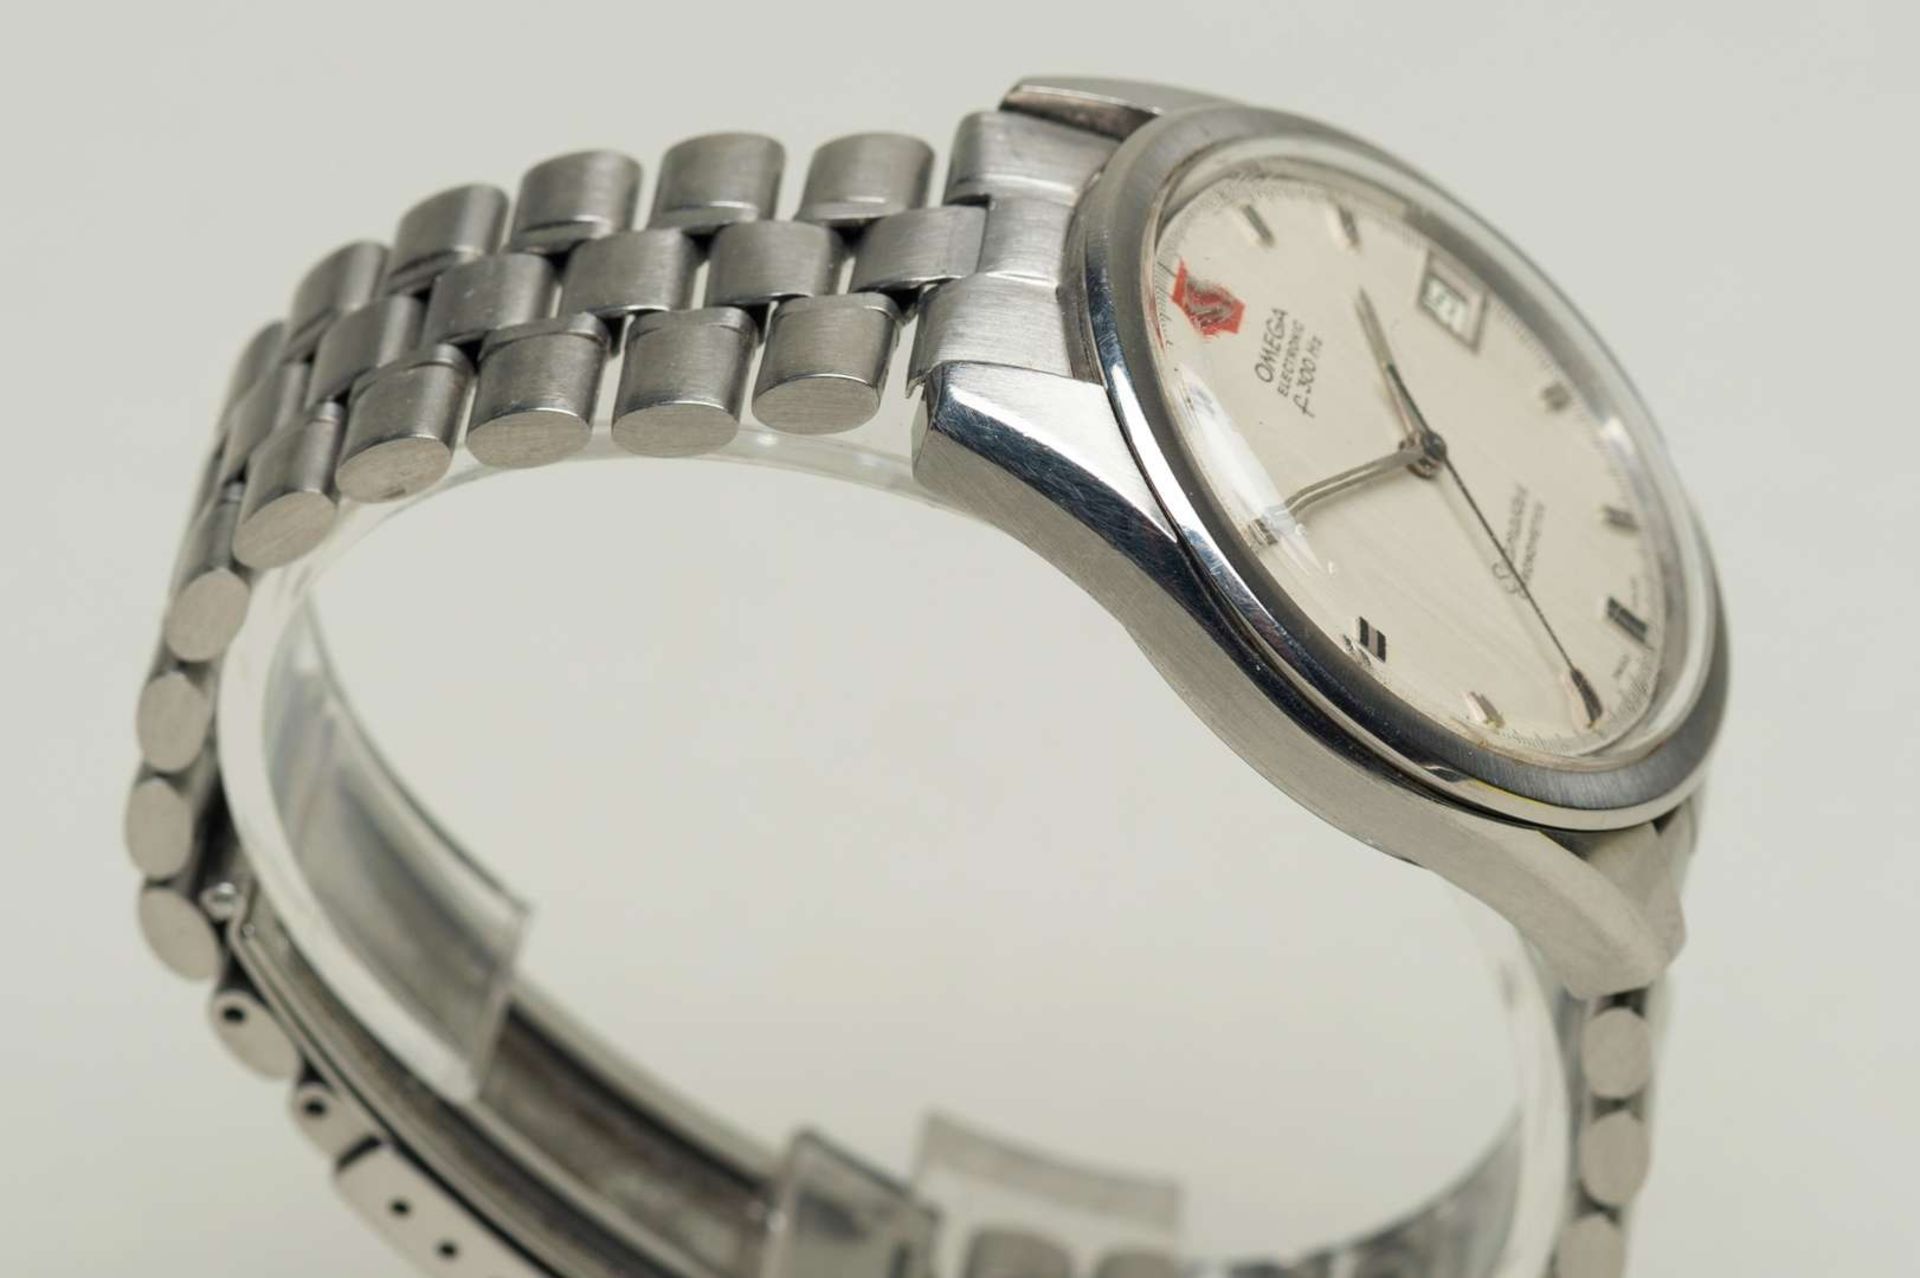 OMEGA. 1970's Seamaster, Chronometer, Electronic f300 Hz, stainless steel calendar wristwatch. - Image 3 of 6